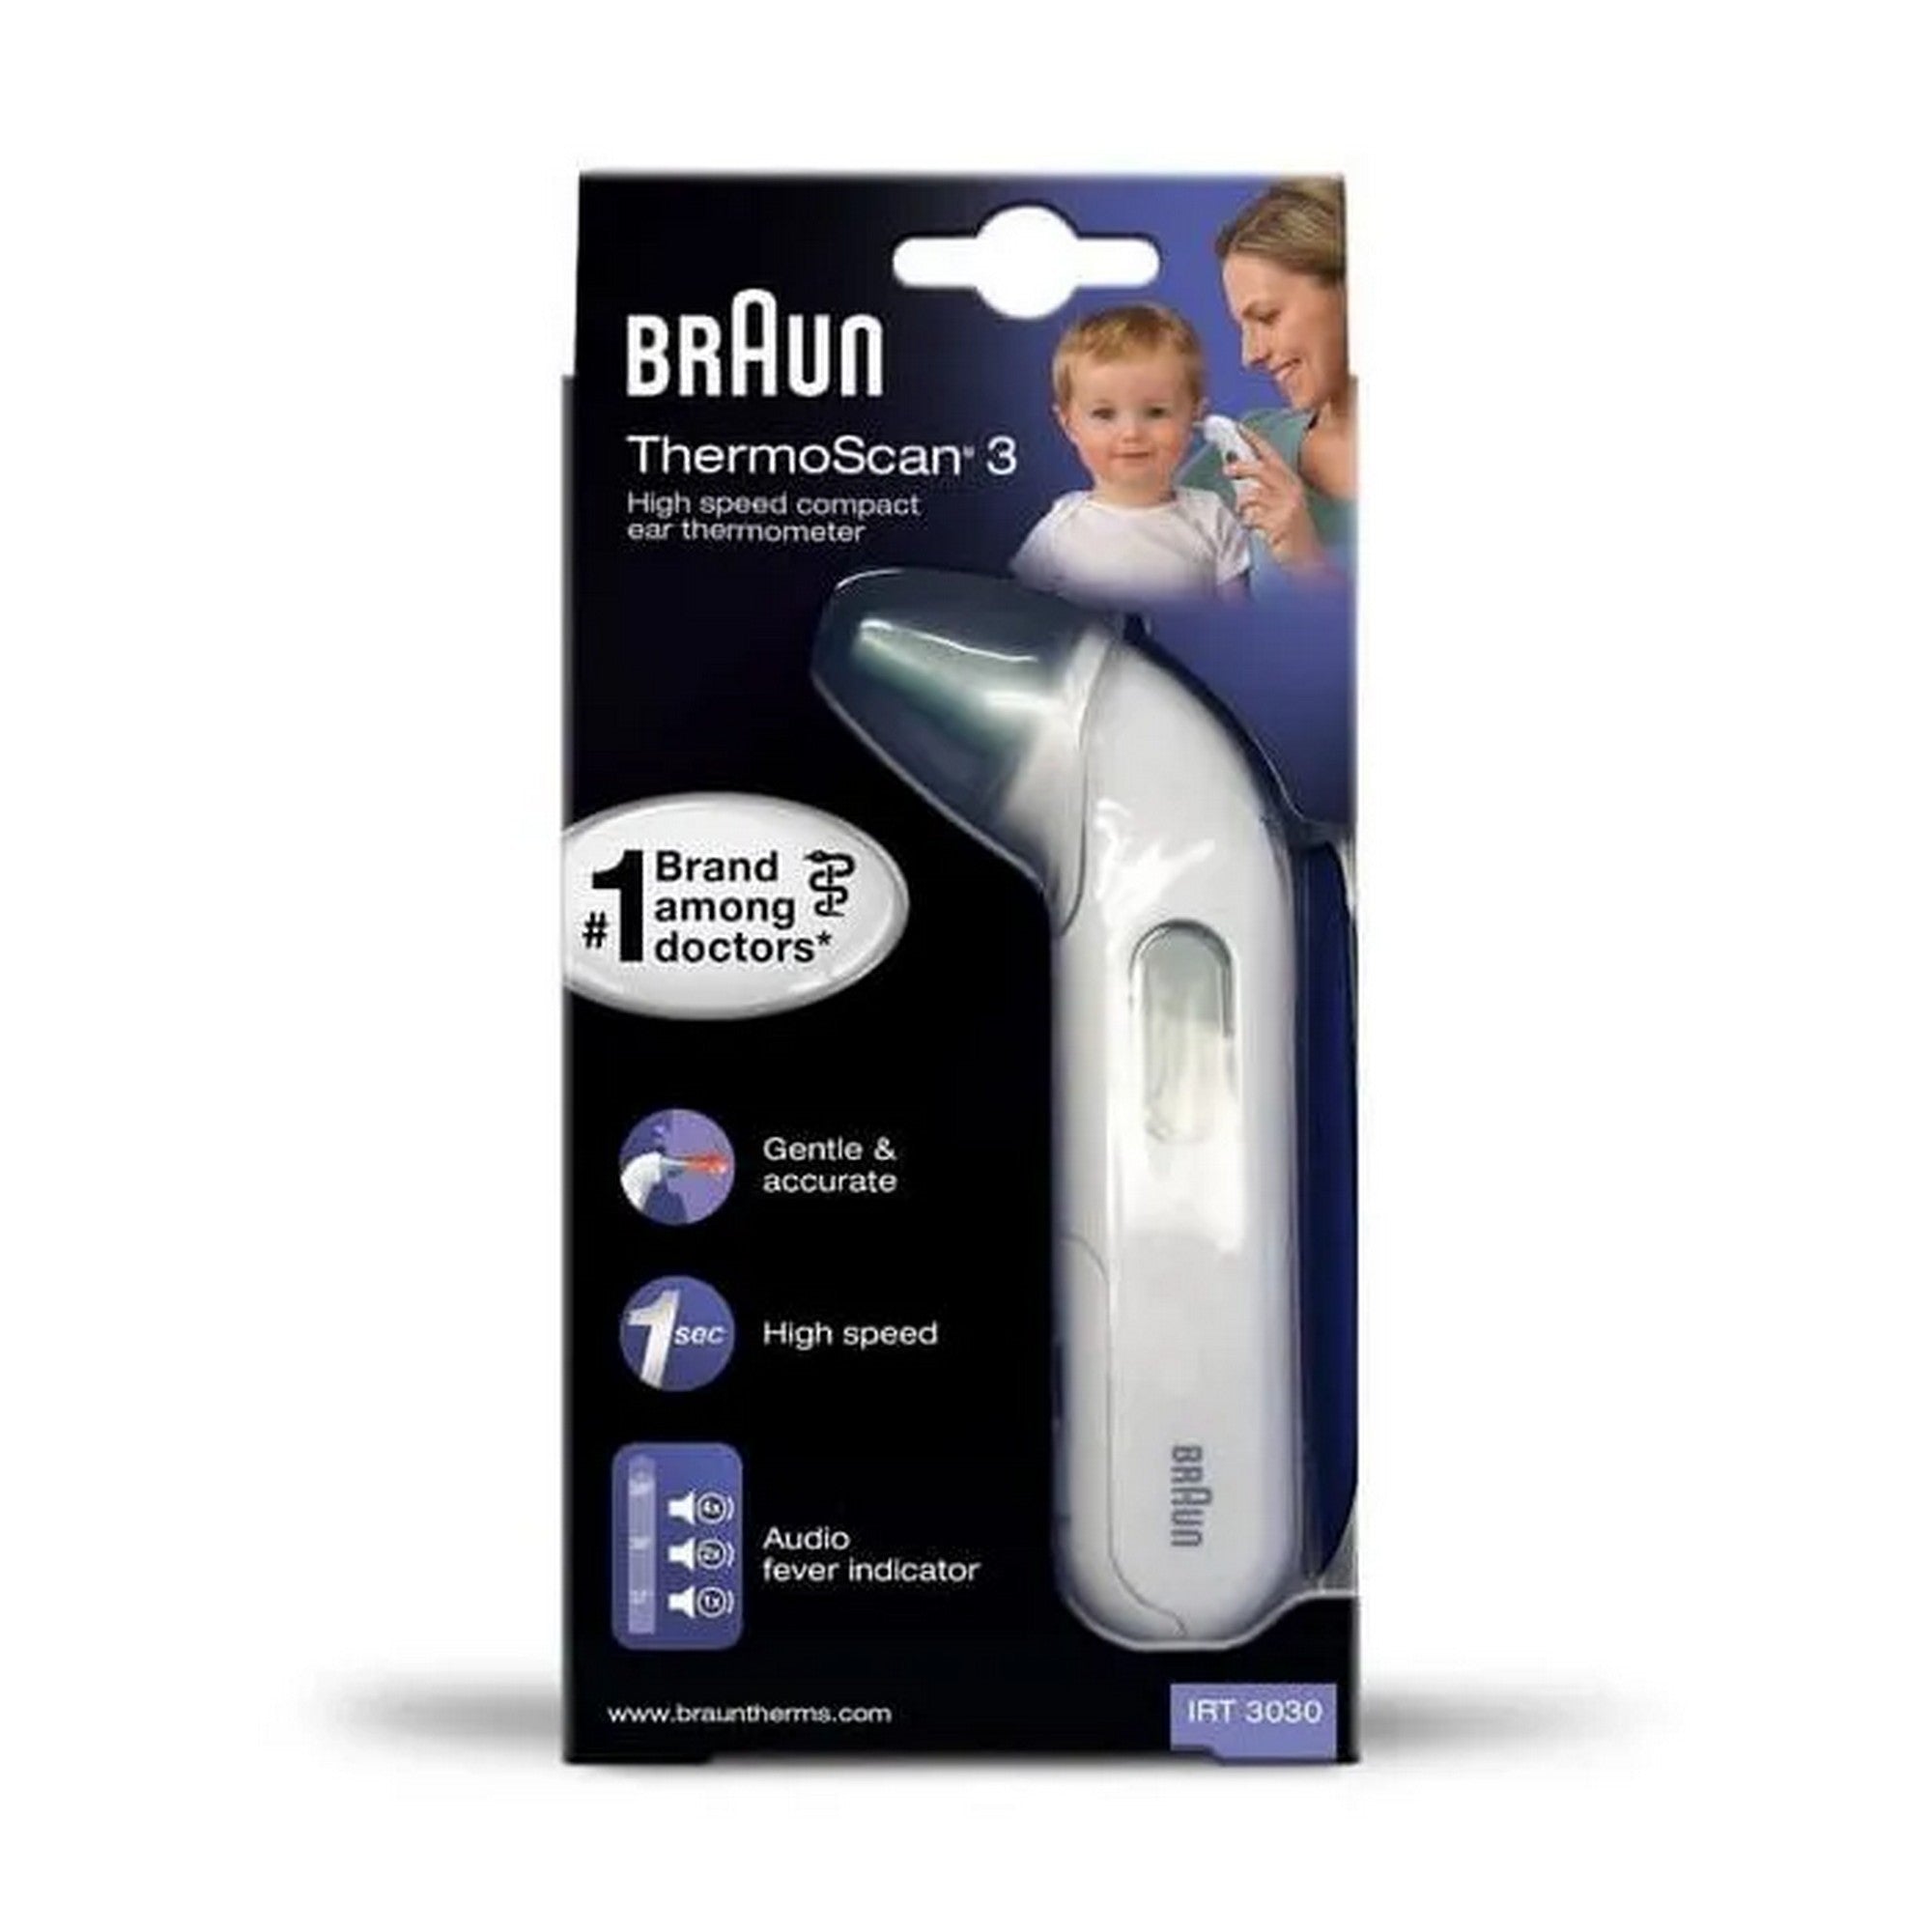 Braun ThermoScan 3 Thermometer